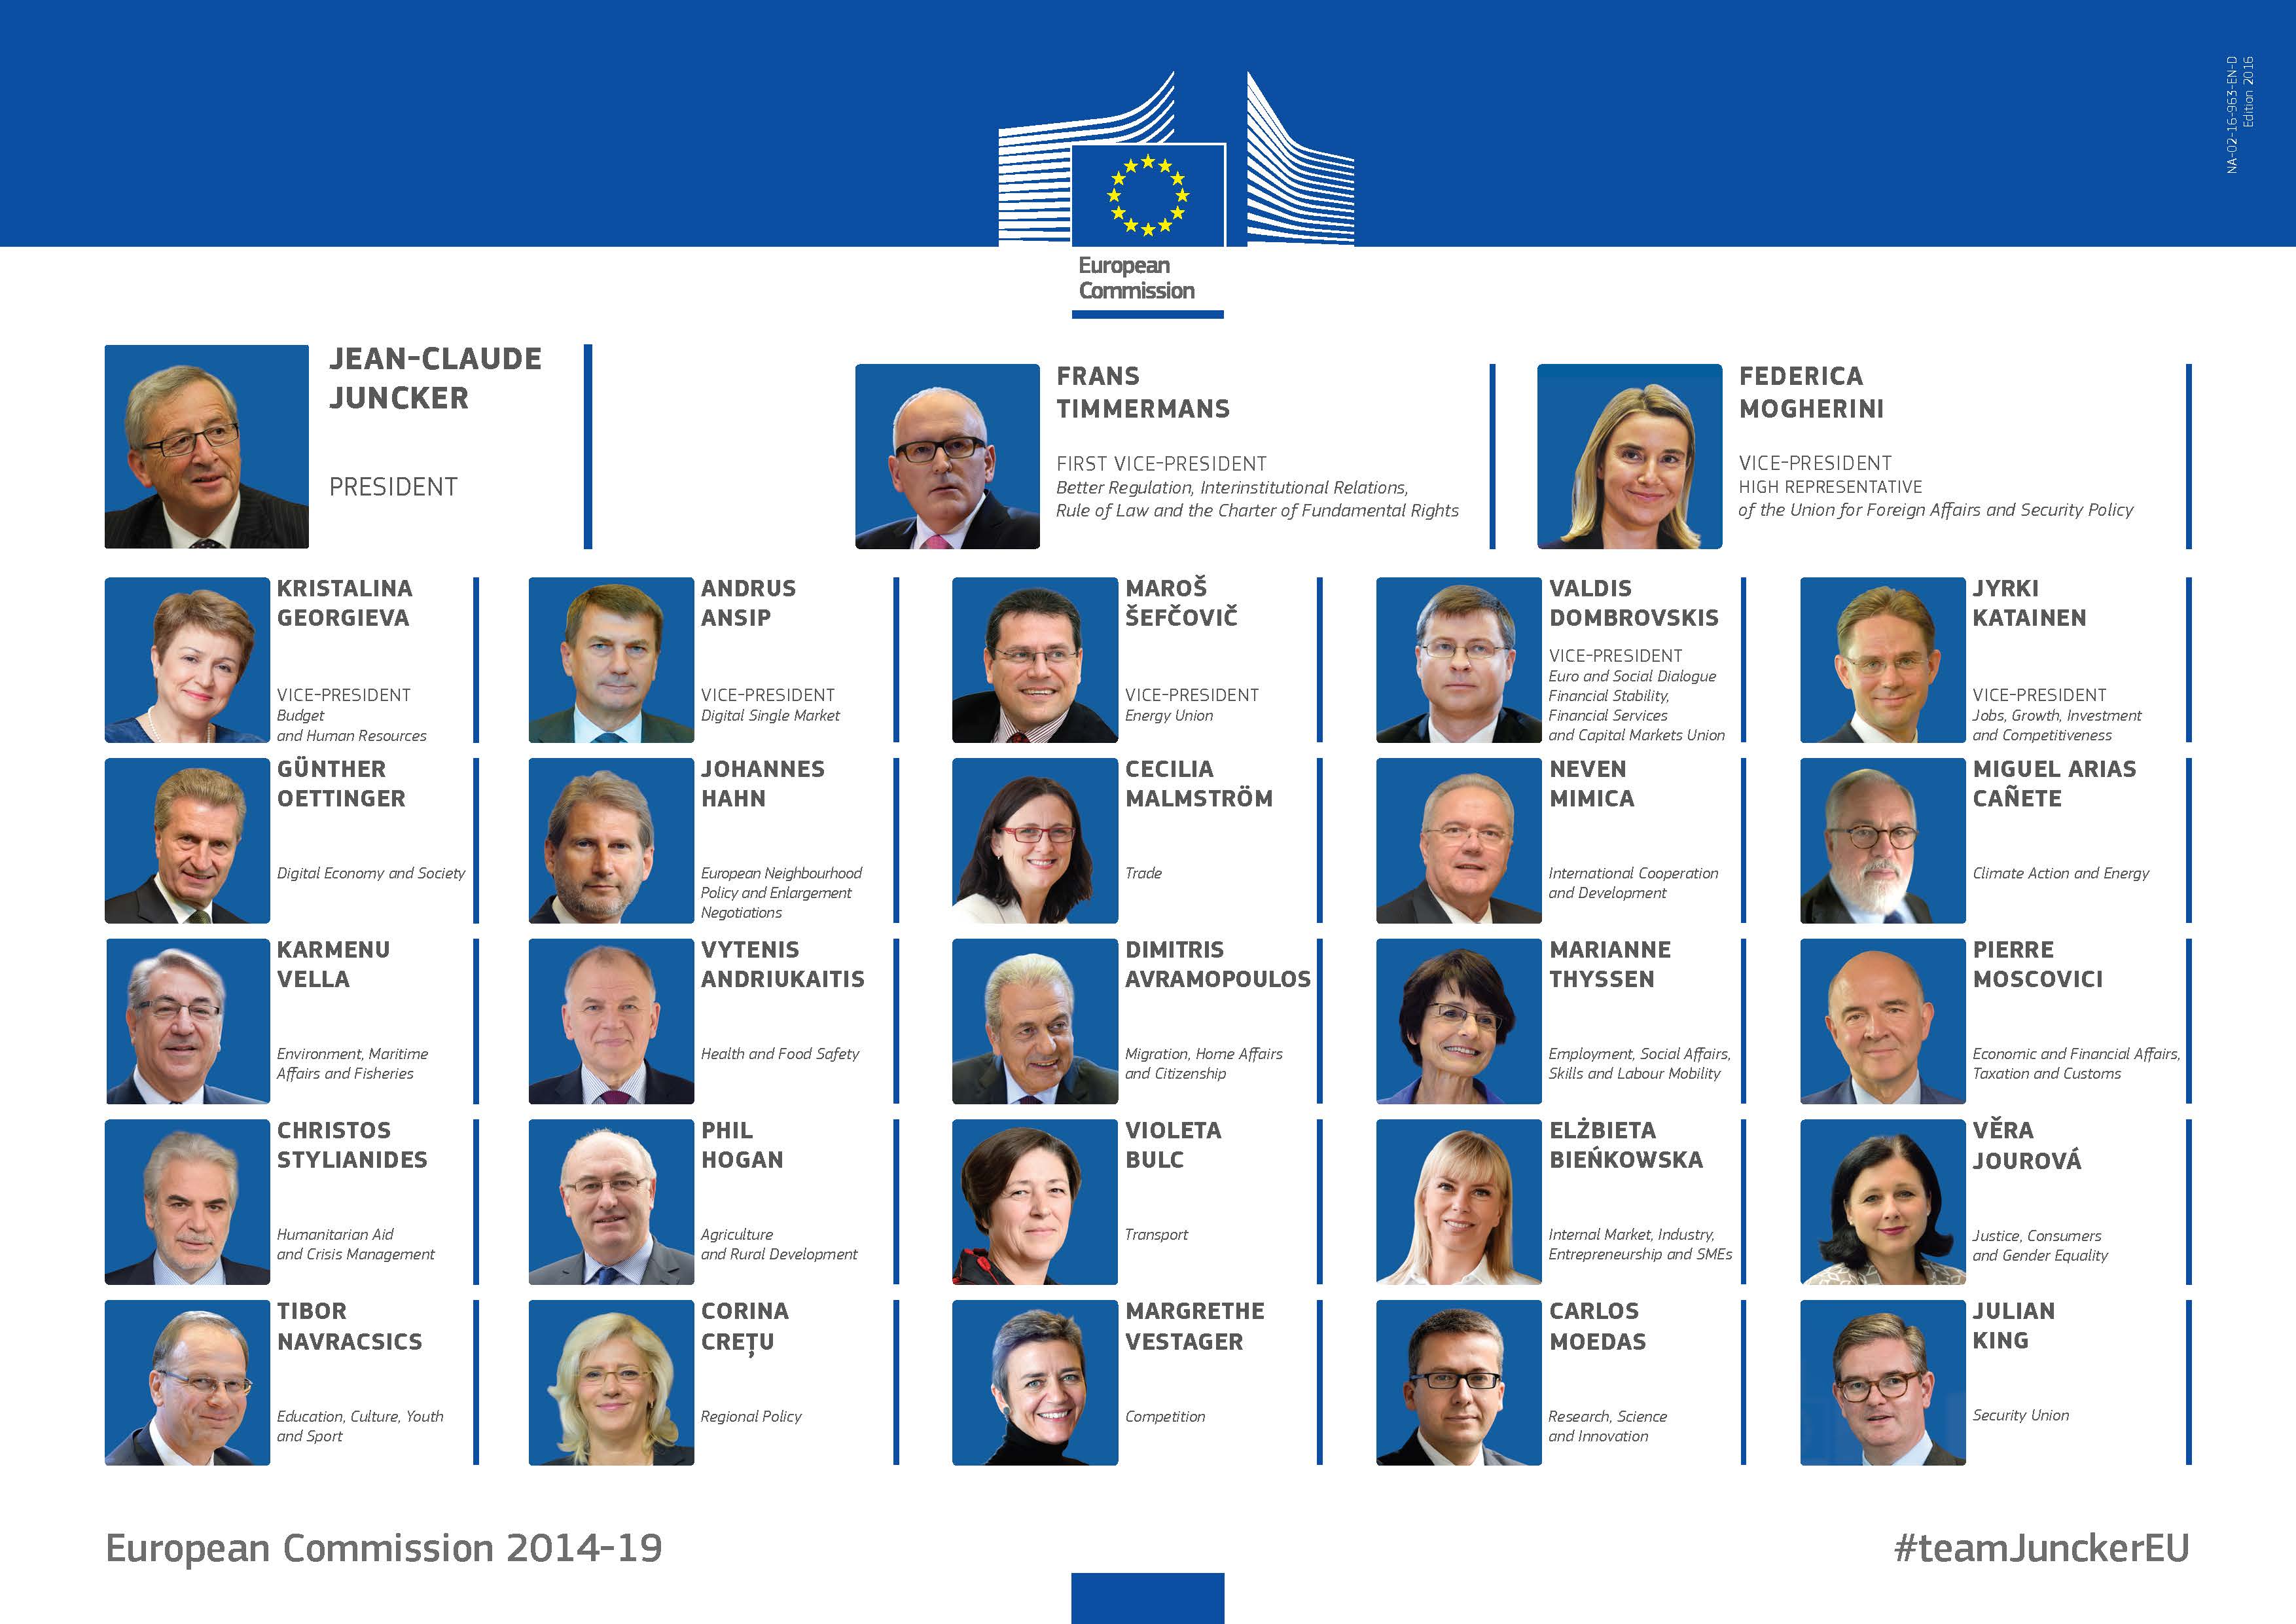 Mini-poster: Members of the European Commission 2017-2019